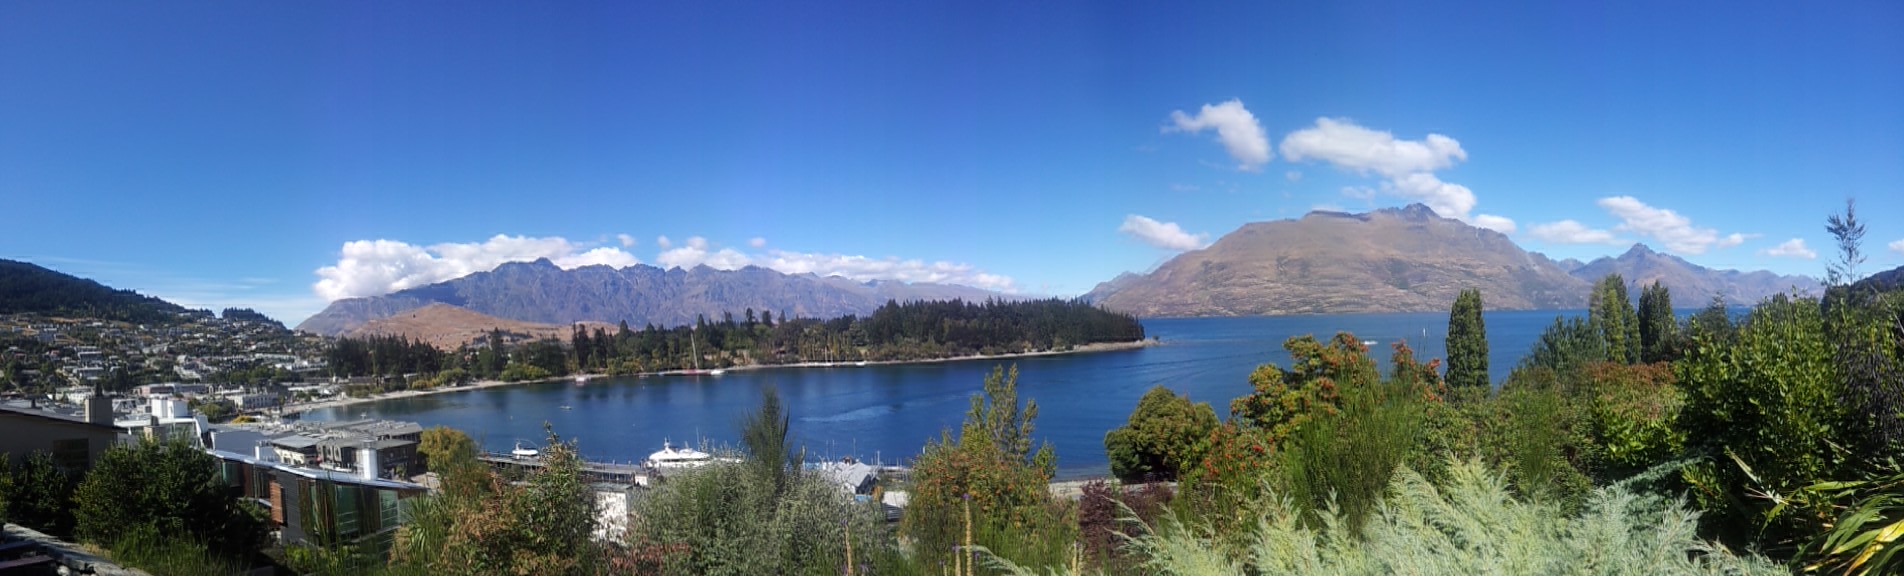 Queenstown, yes, there is a reason tourist flood to this place...